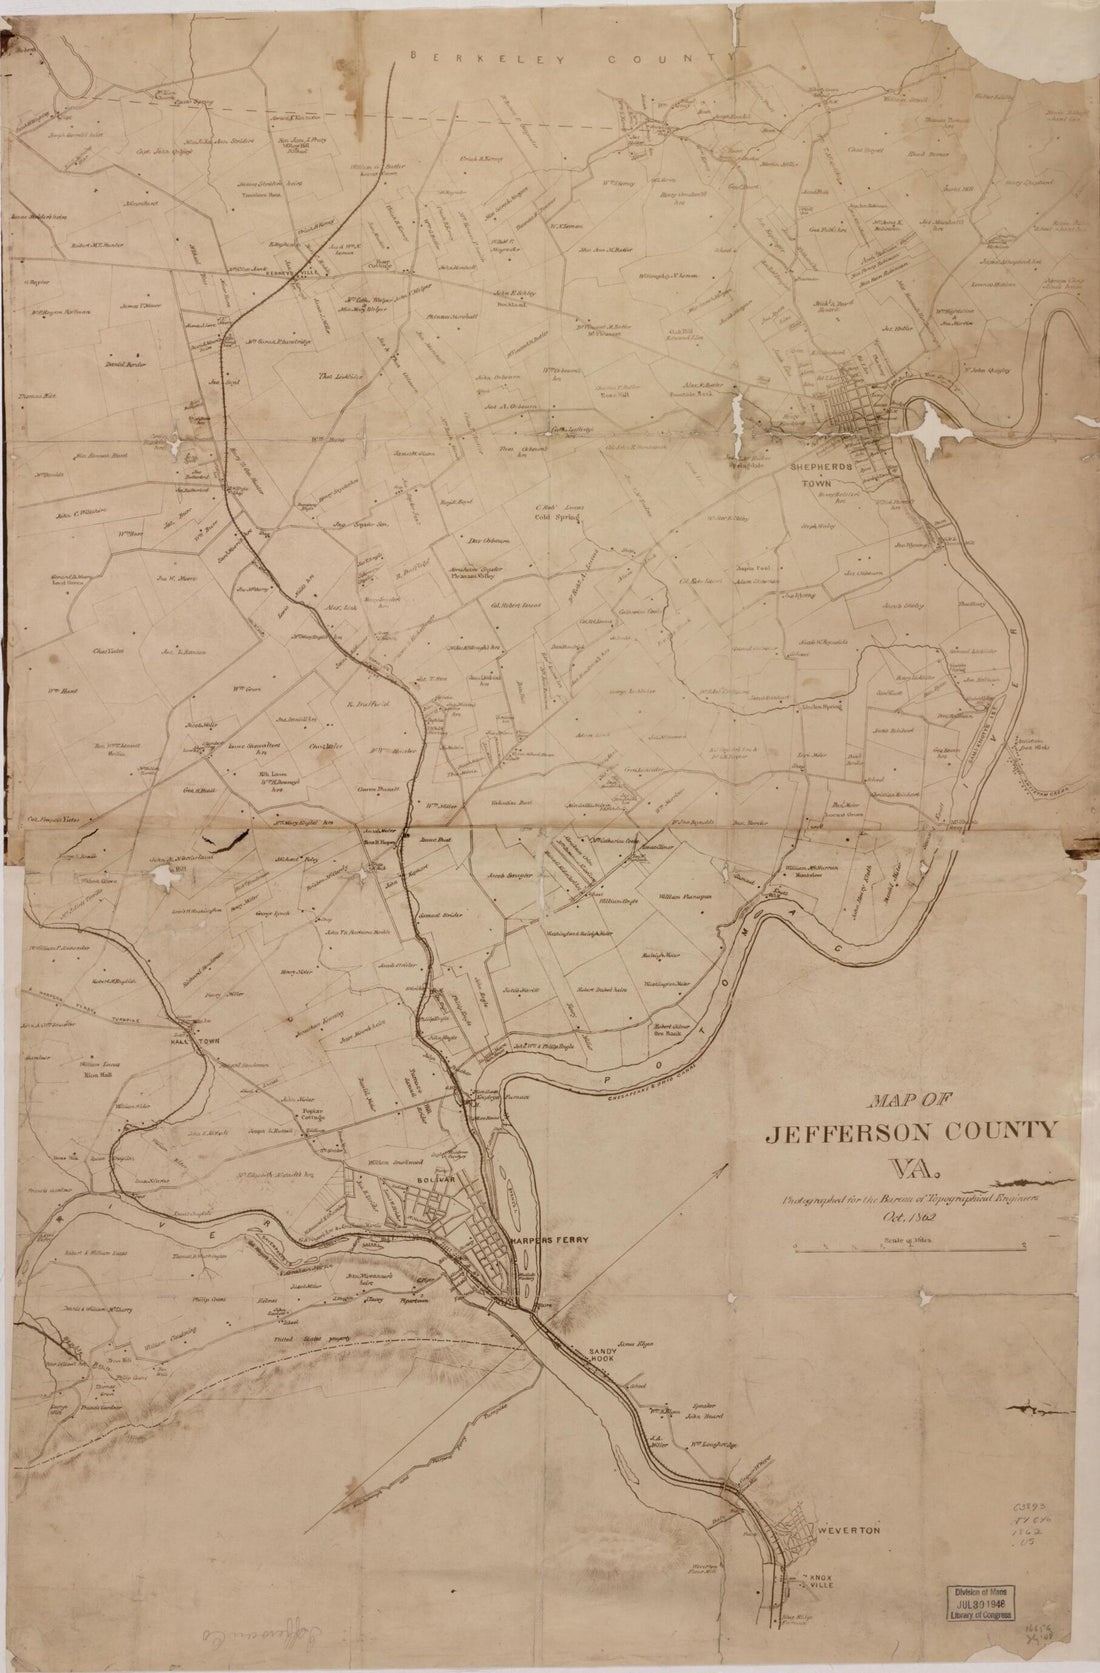 This old map of Map of Jefferson County, VA from 1862 was created by S. Howell Brown in 1862